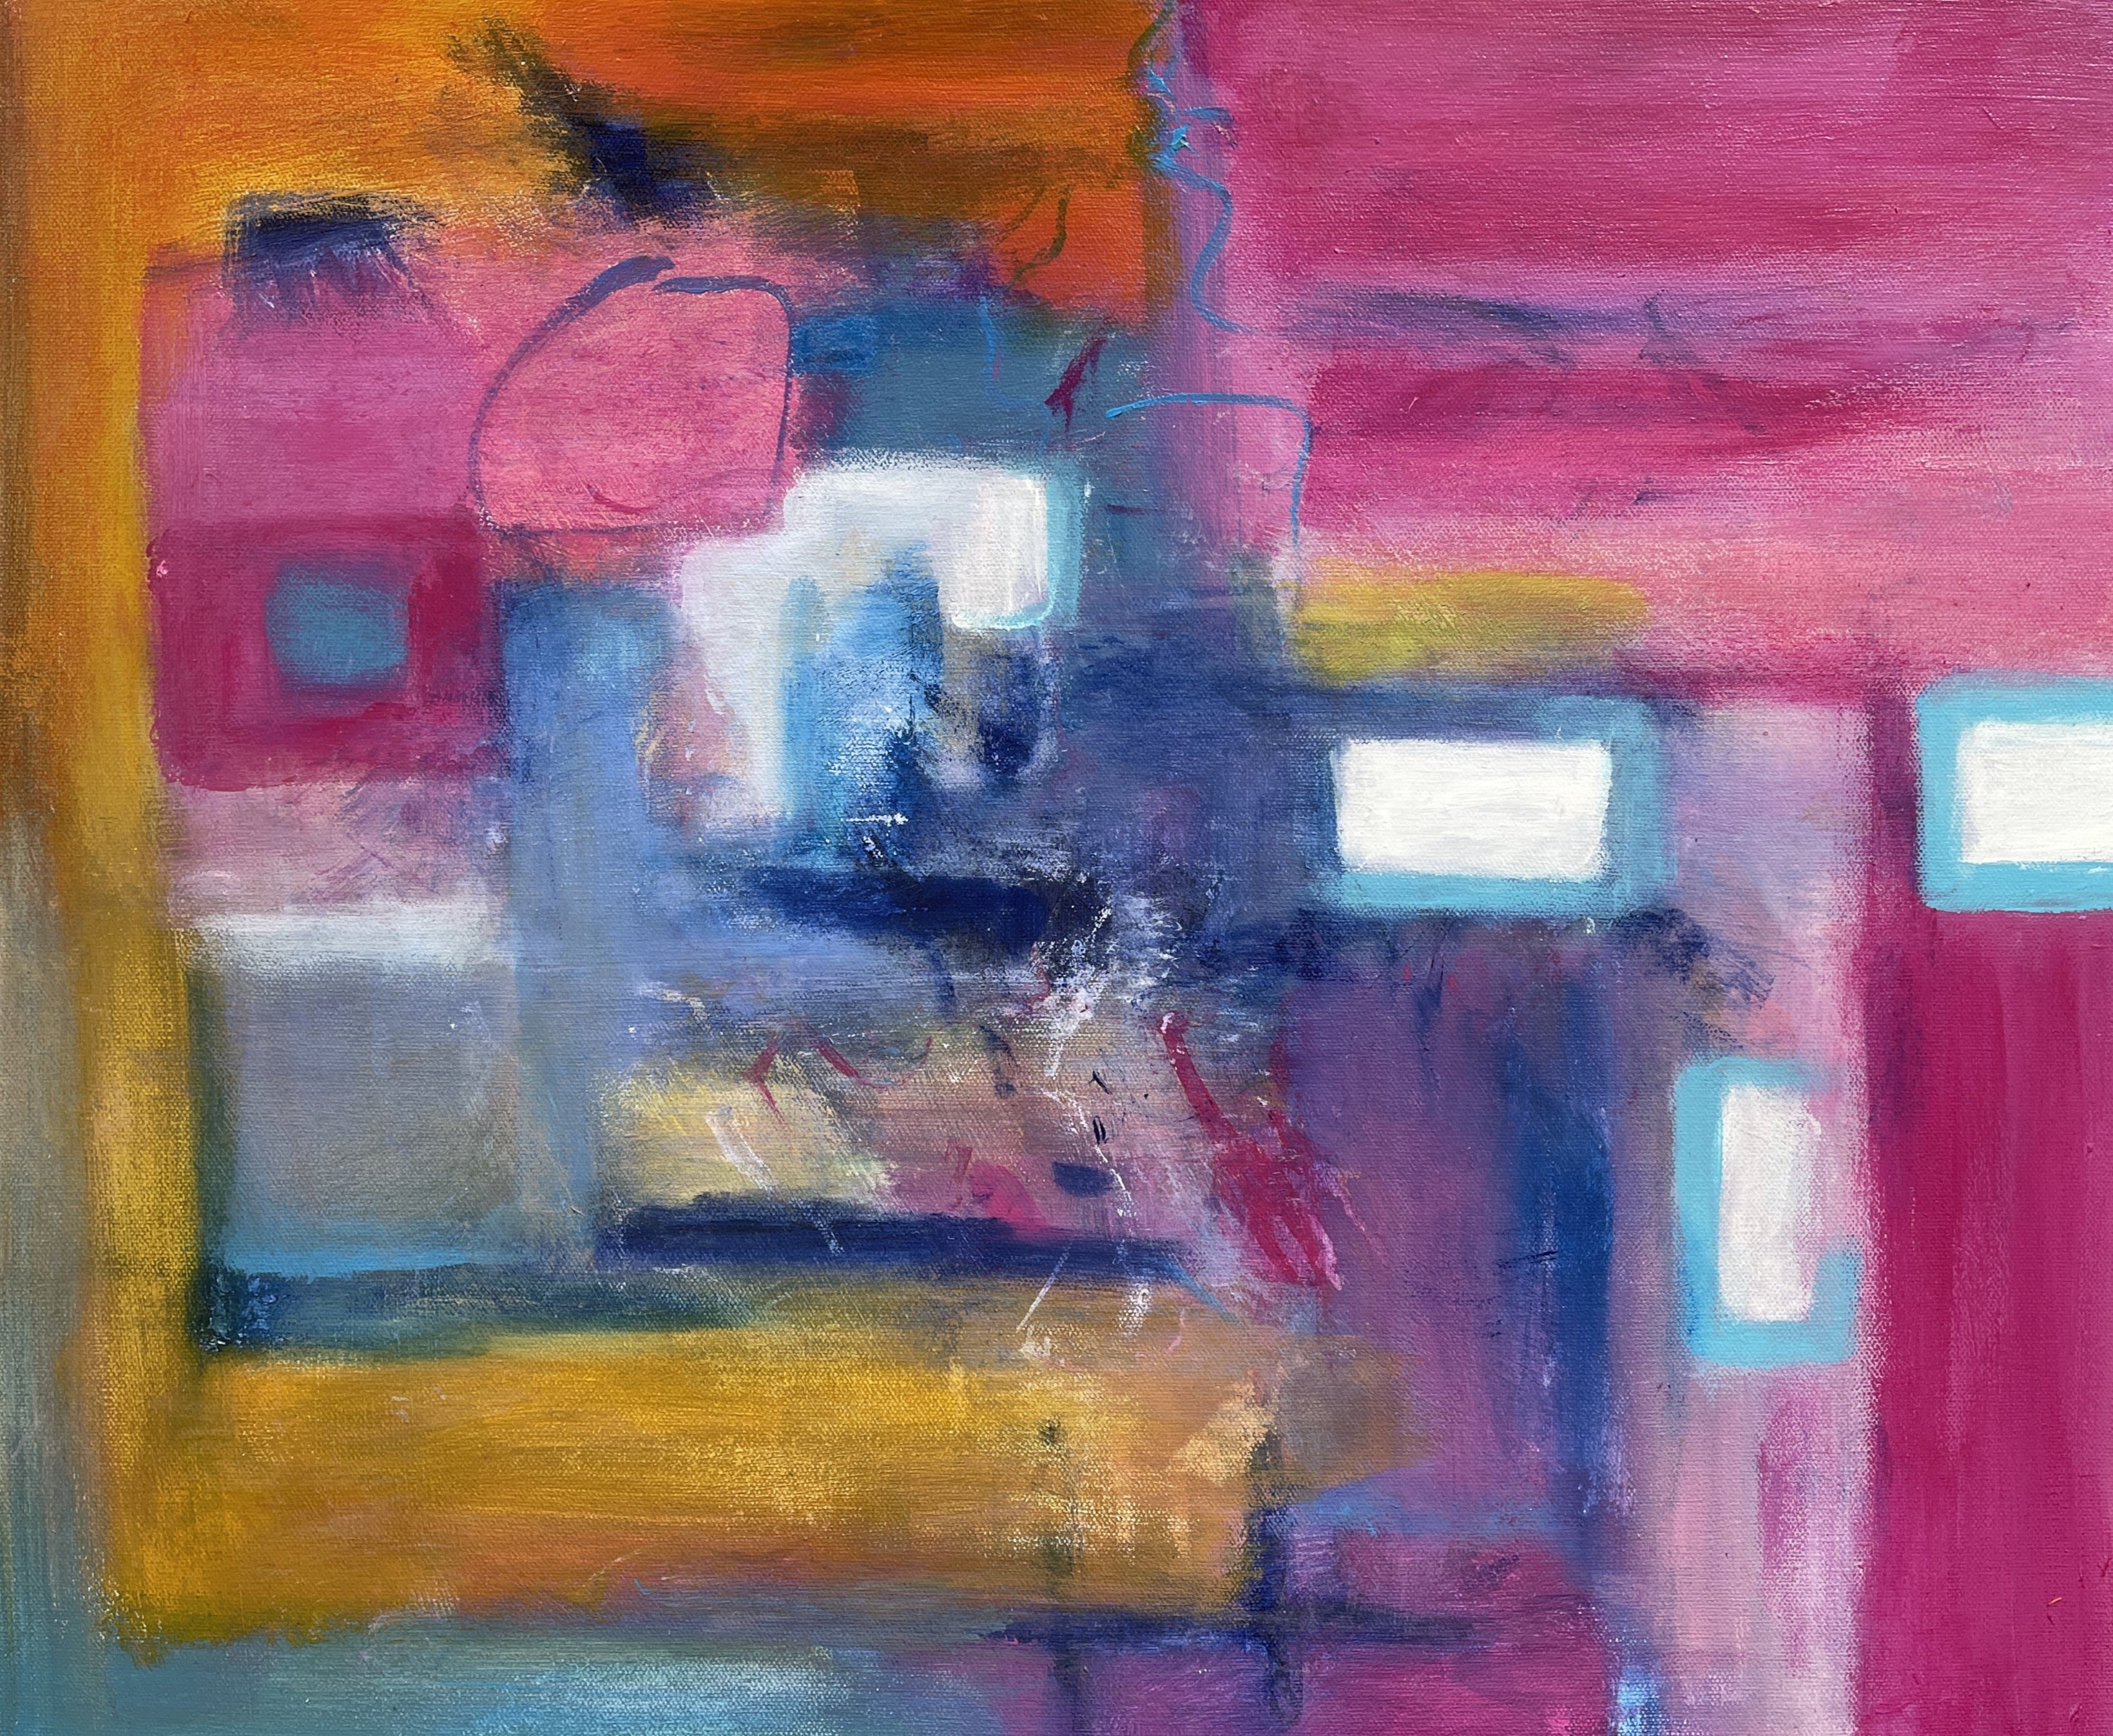 Night Ride on the Subway of Love Abstract (20" x 24")